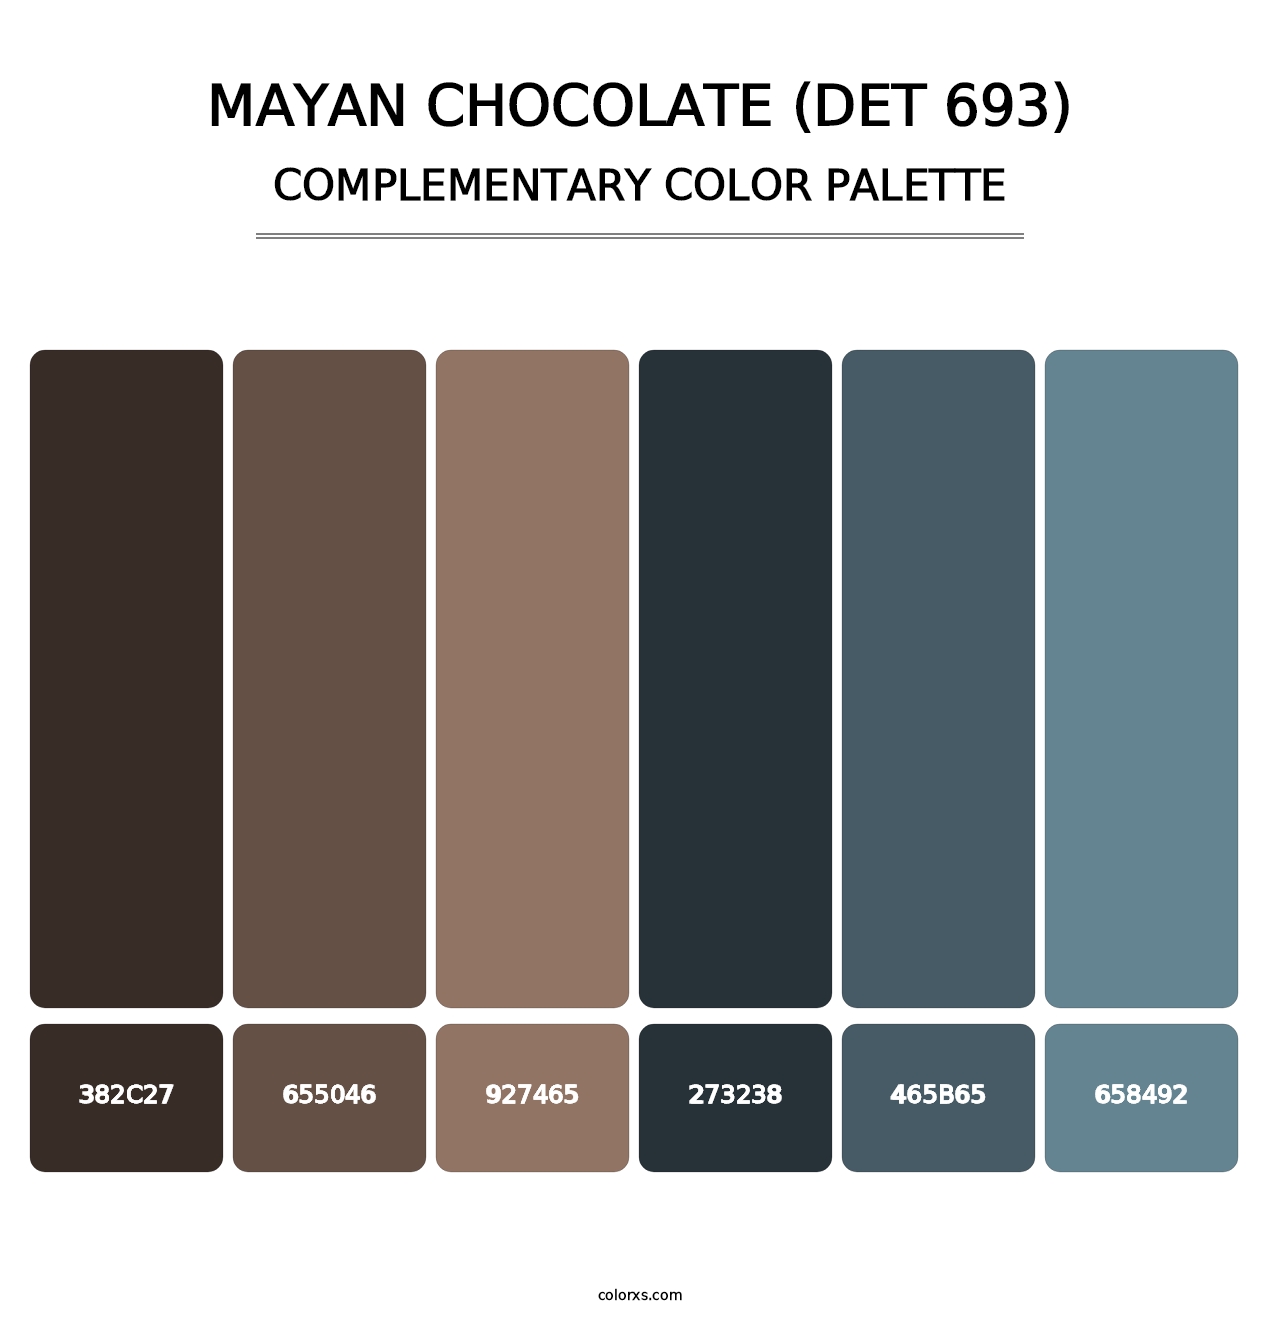 Mayan Chocolate (DET 693) - Complementary Color Palette